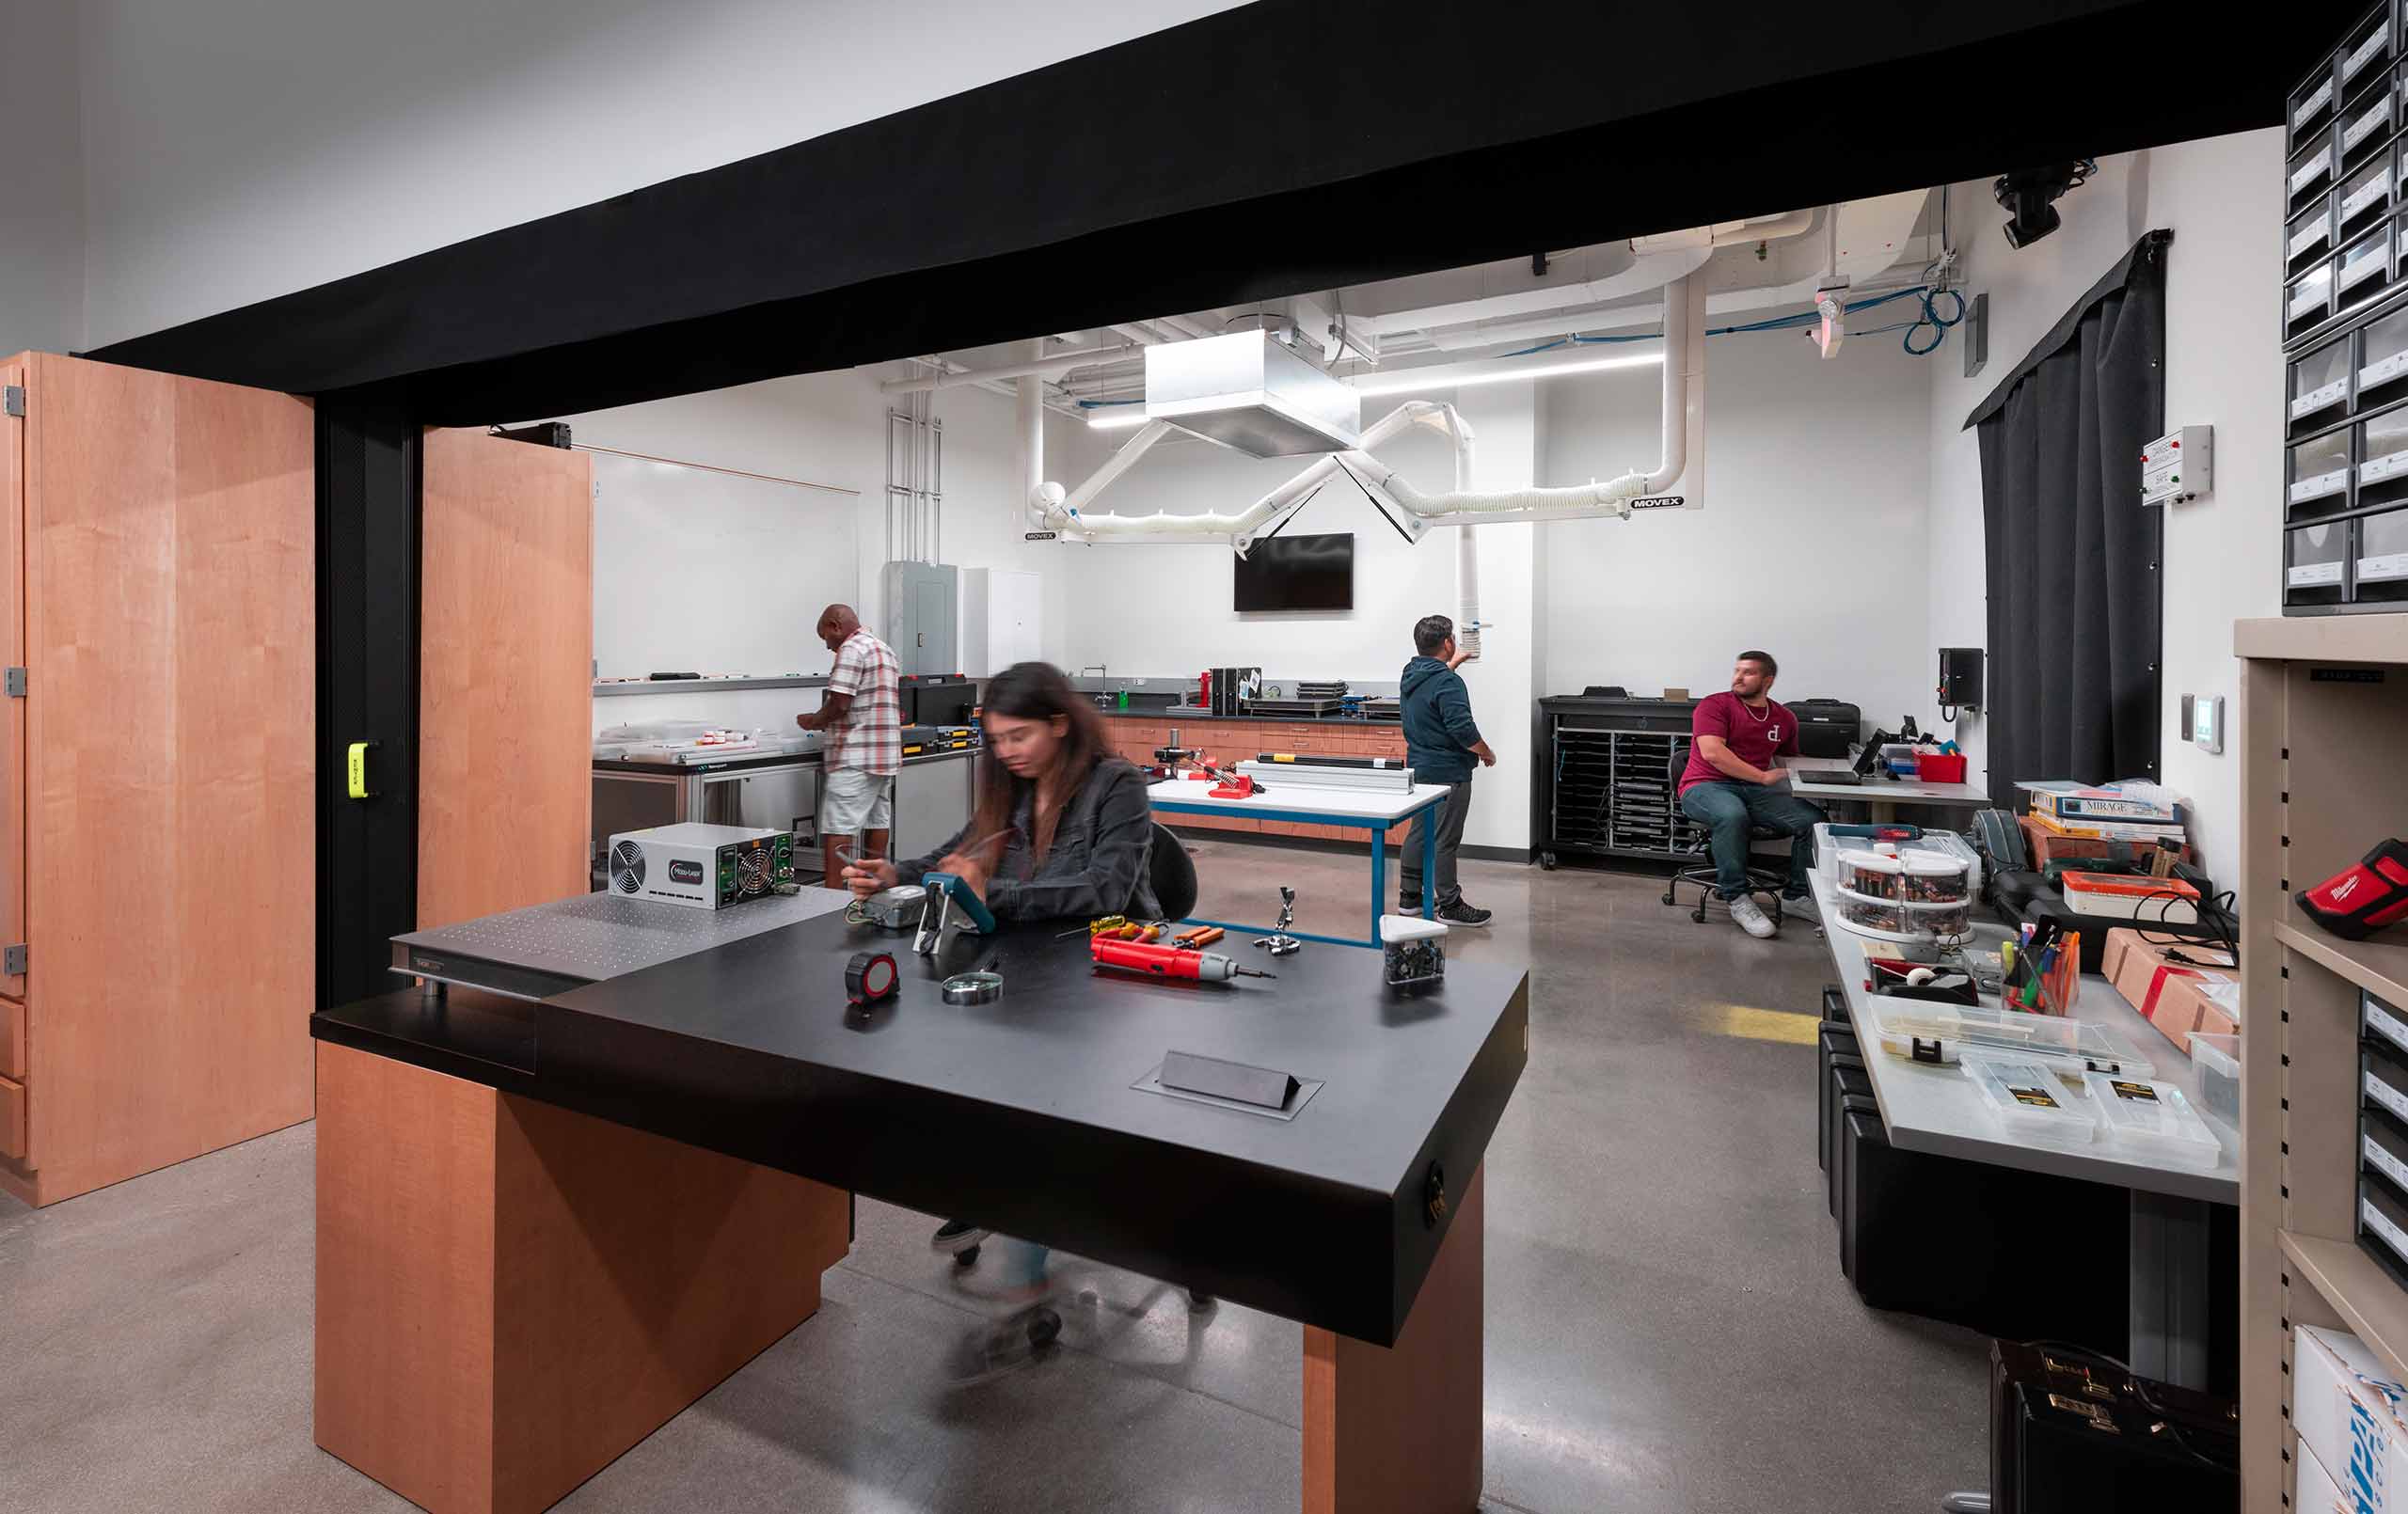 Laser/photonics/optics lab in College of Lake County Science & Advanced Technologies Building